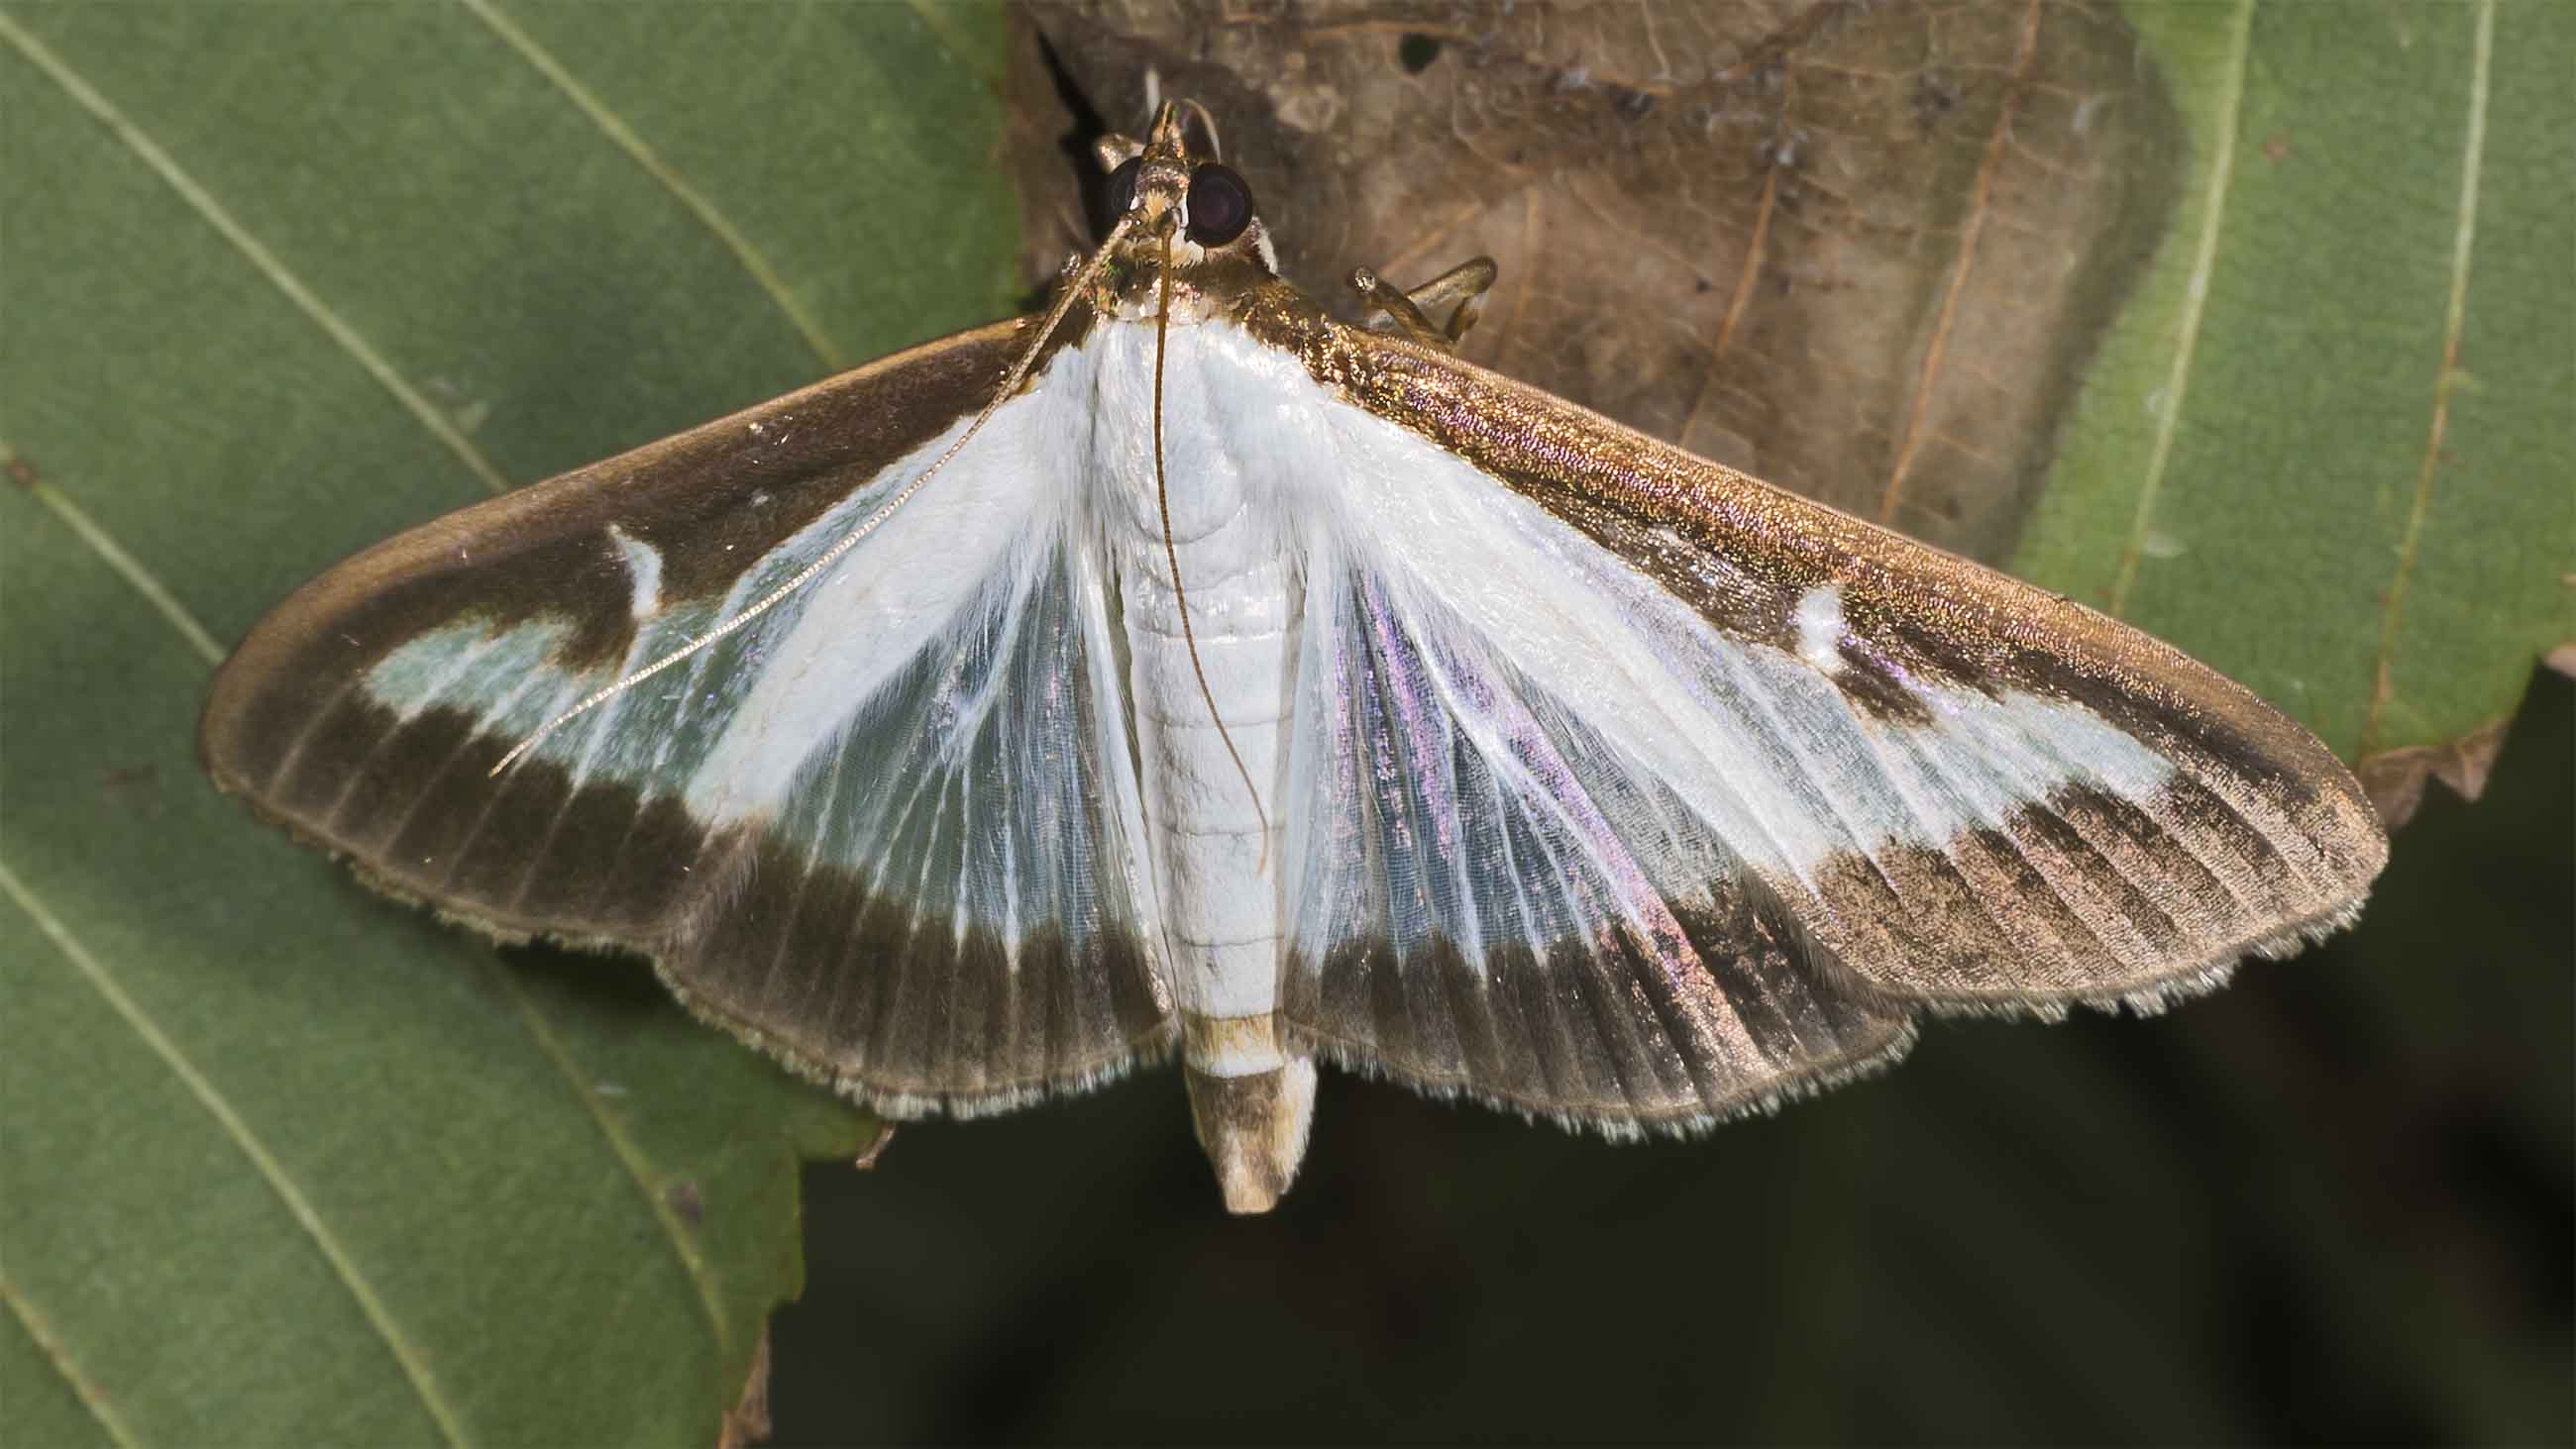 The larval caterpillar of the box tree moth can devour dozens of leaves during its development.